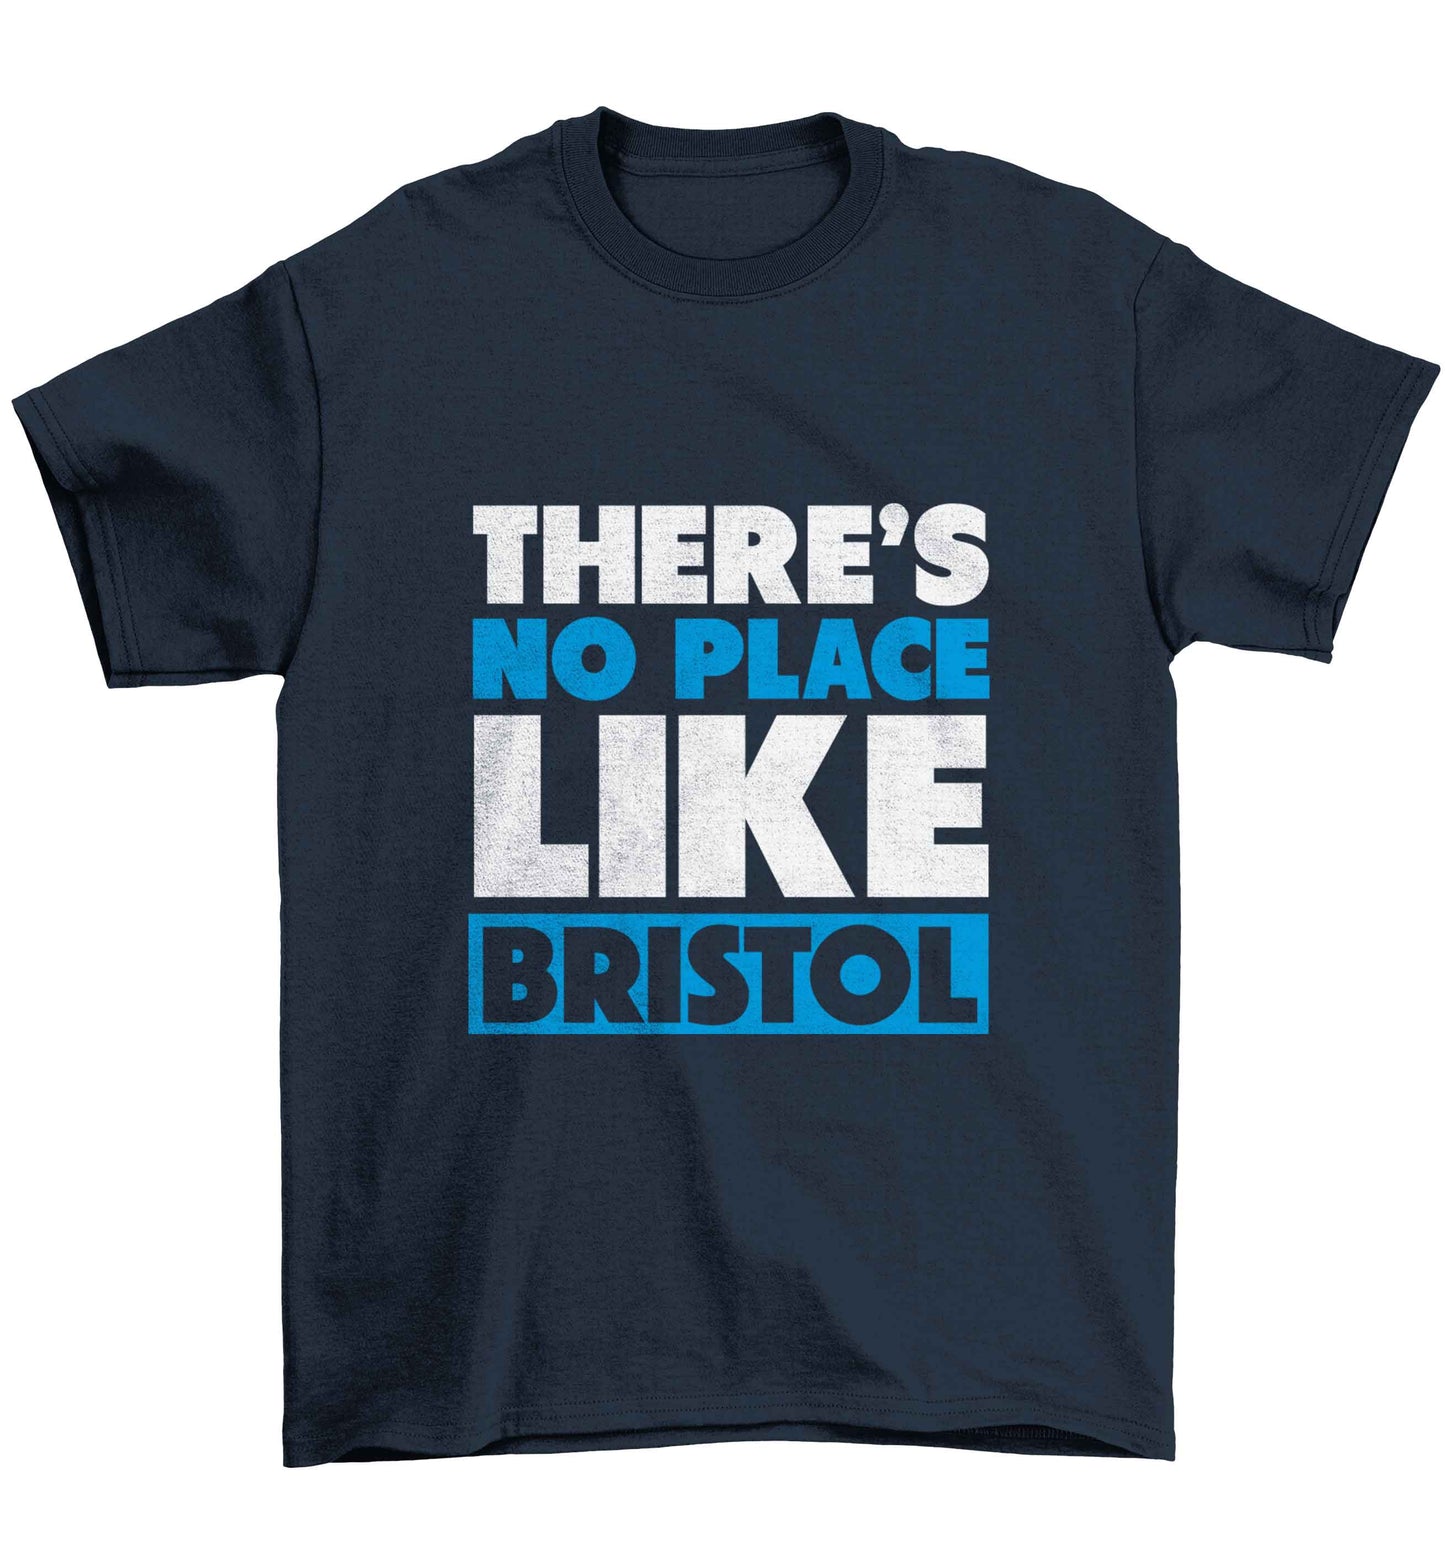 There's no place like Bristol Children's navy Tshirt 12-13 Years